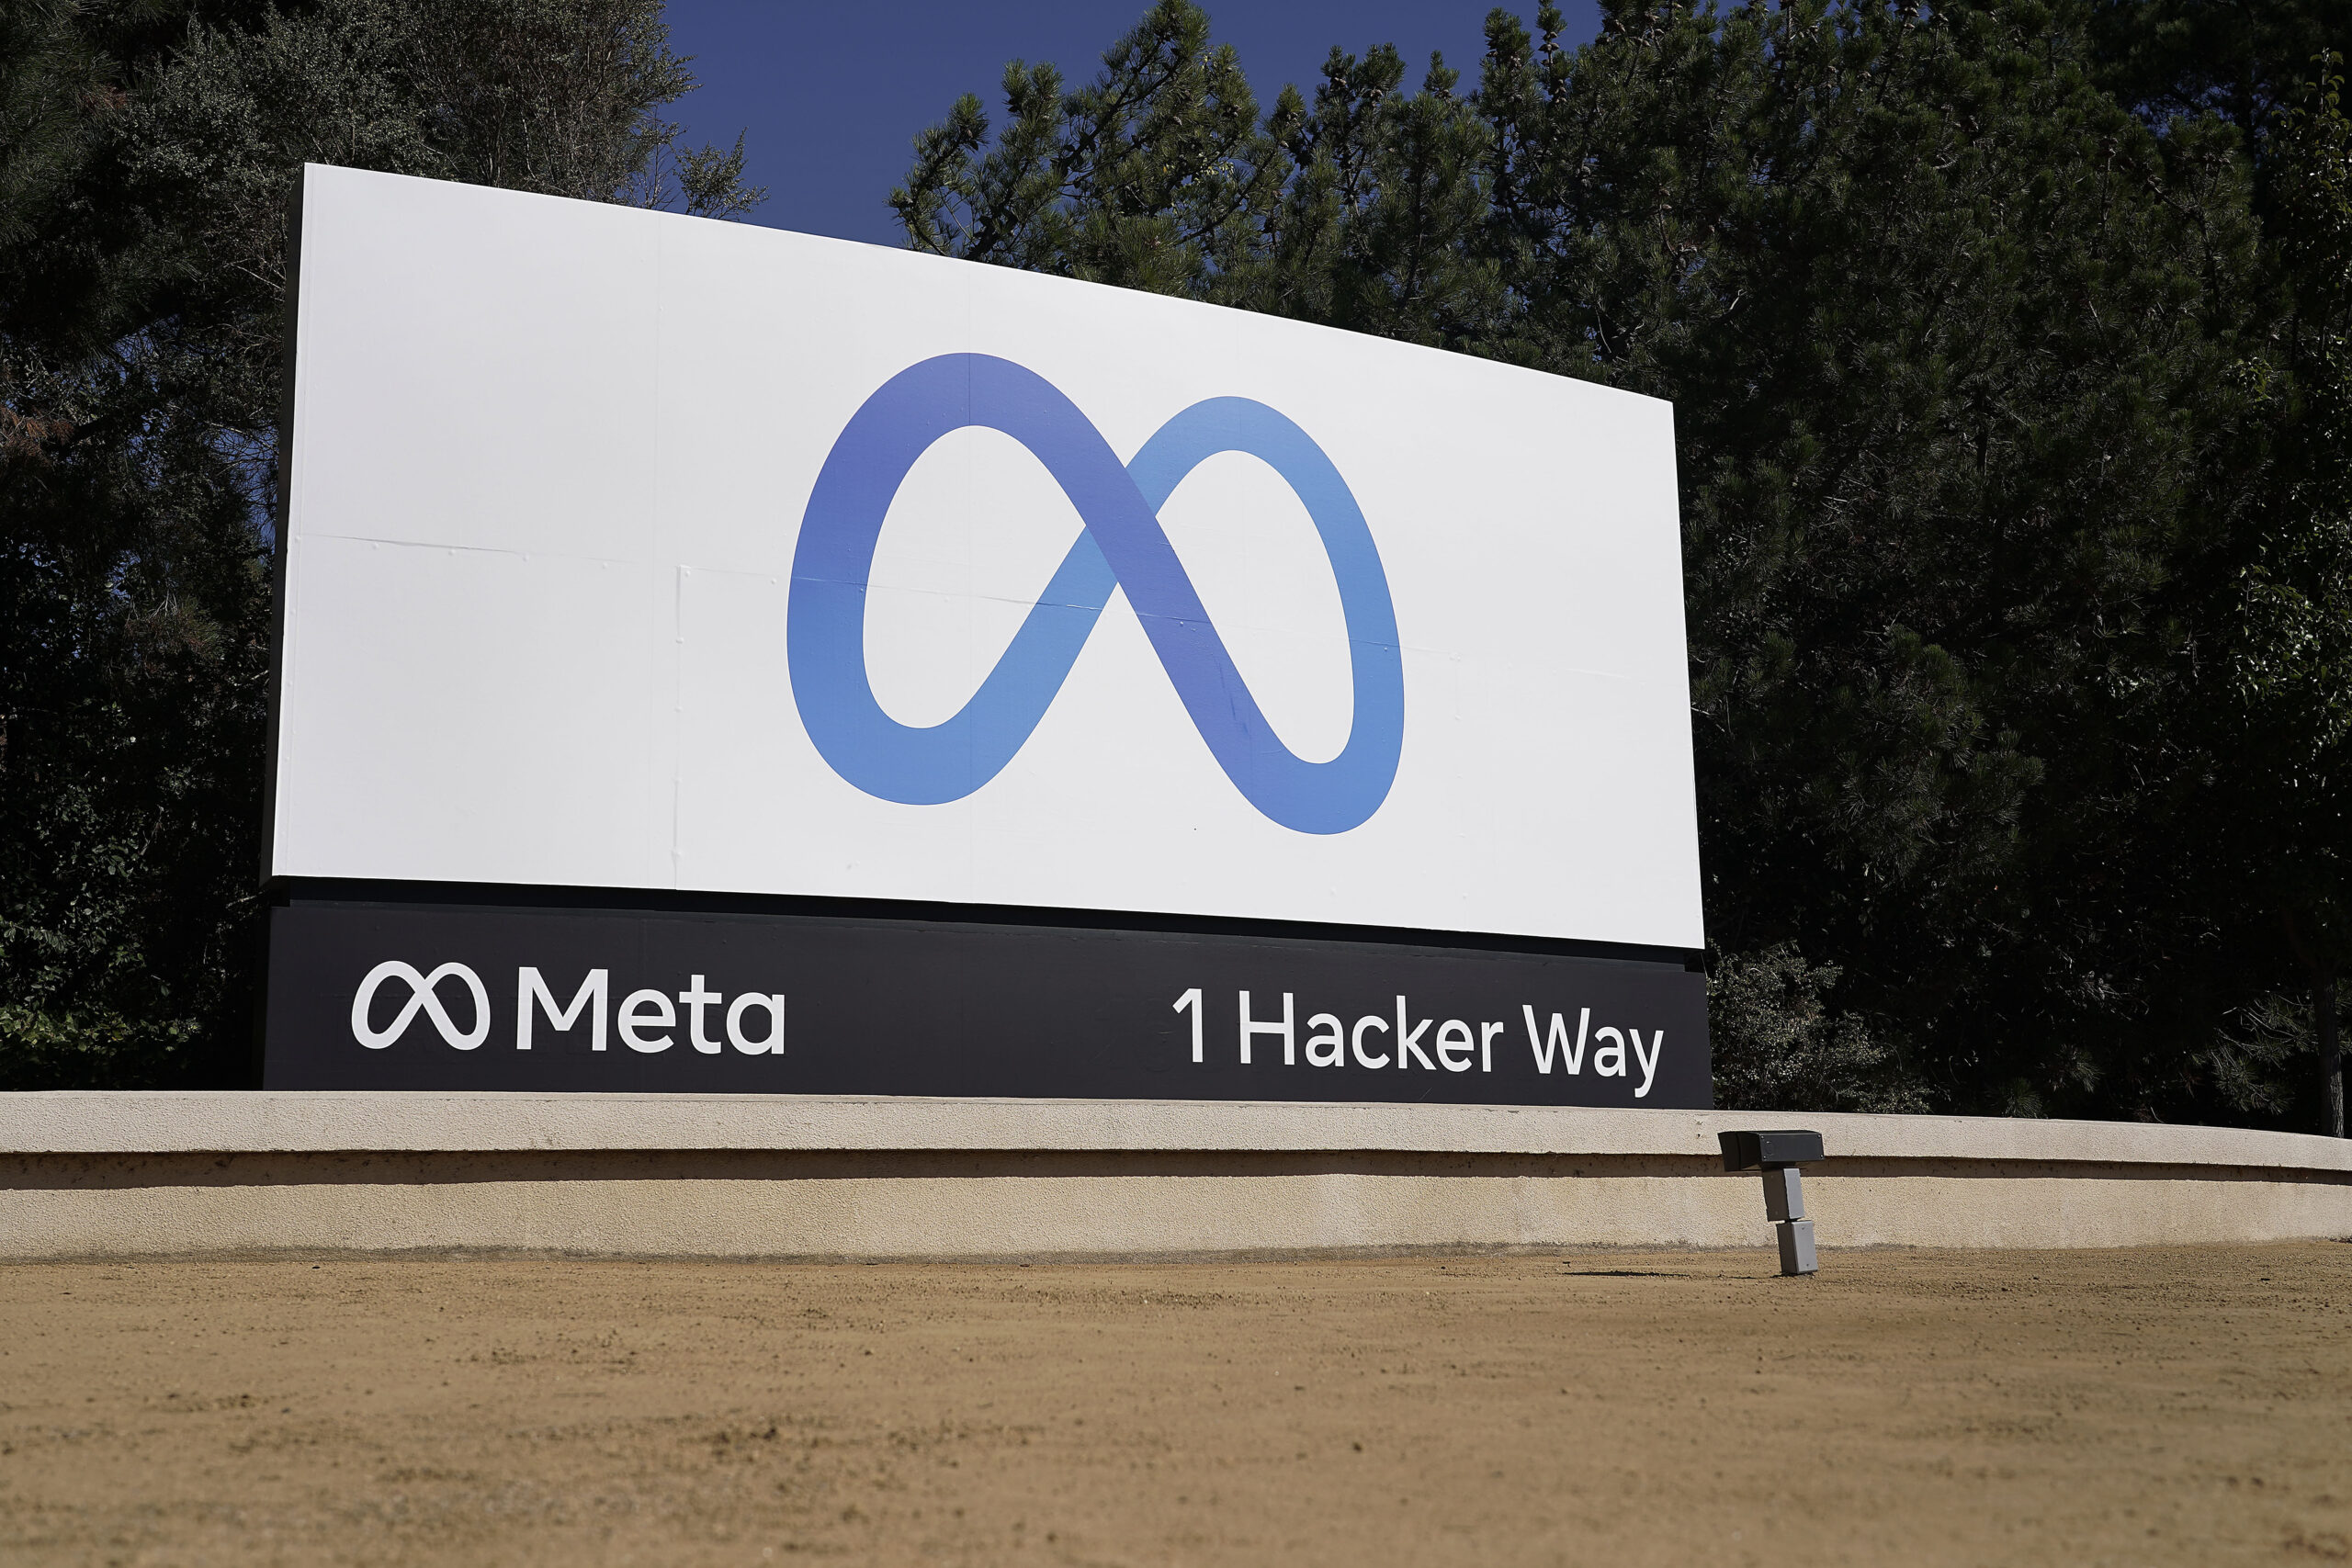 Facebook's Meta logo sign is seen at the company headquarters in Menlo Park, California, on, Oct. 28, 2021. Photo credit: Tony Avelar, The Associated Press